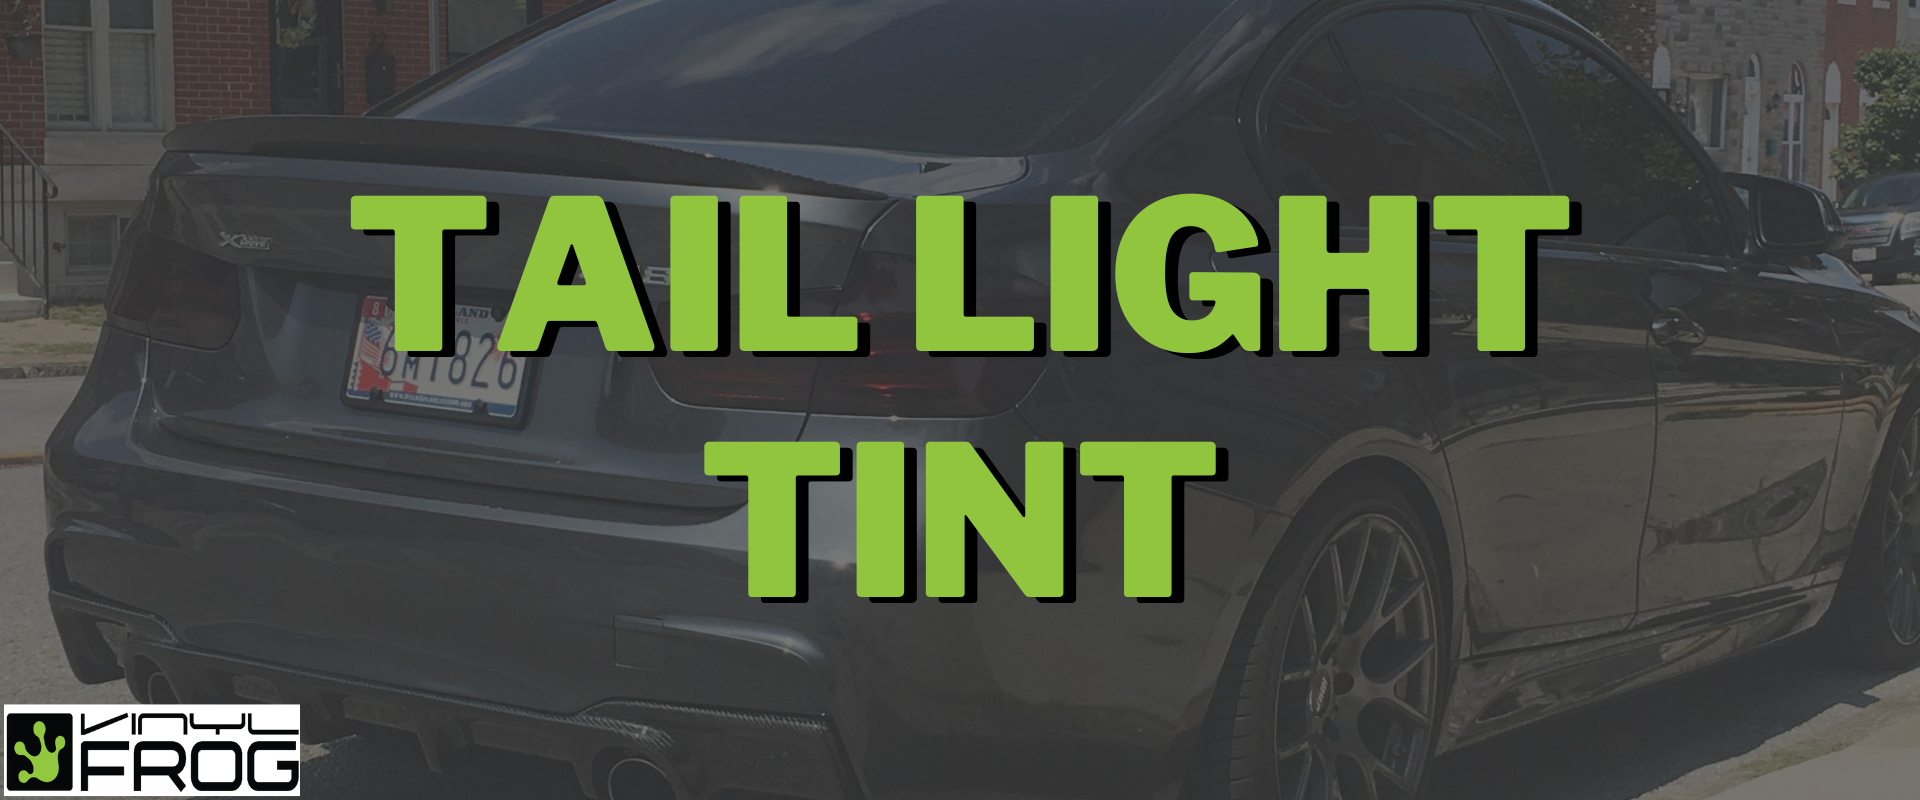 Experiment with Car Colors, With Plasti Dip -  Motors Blog